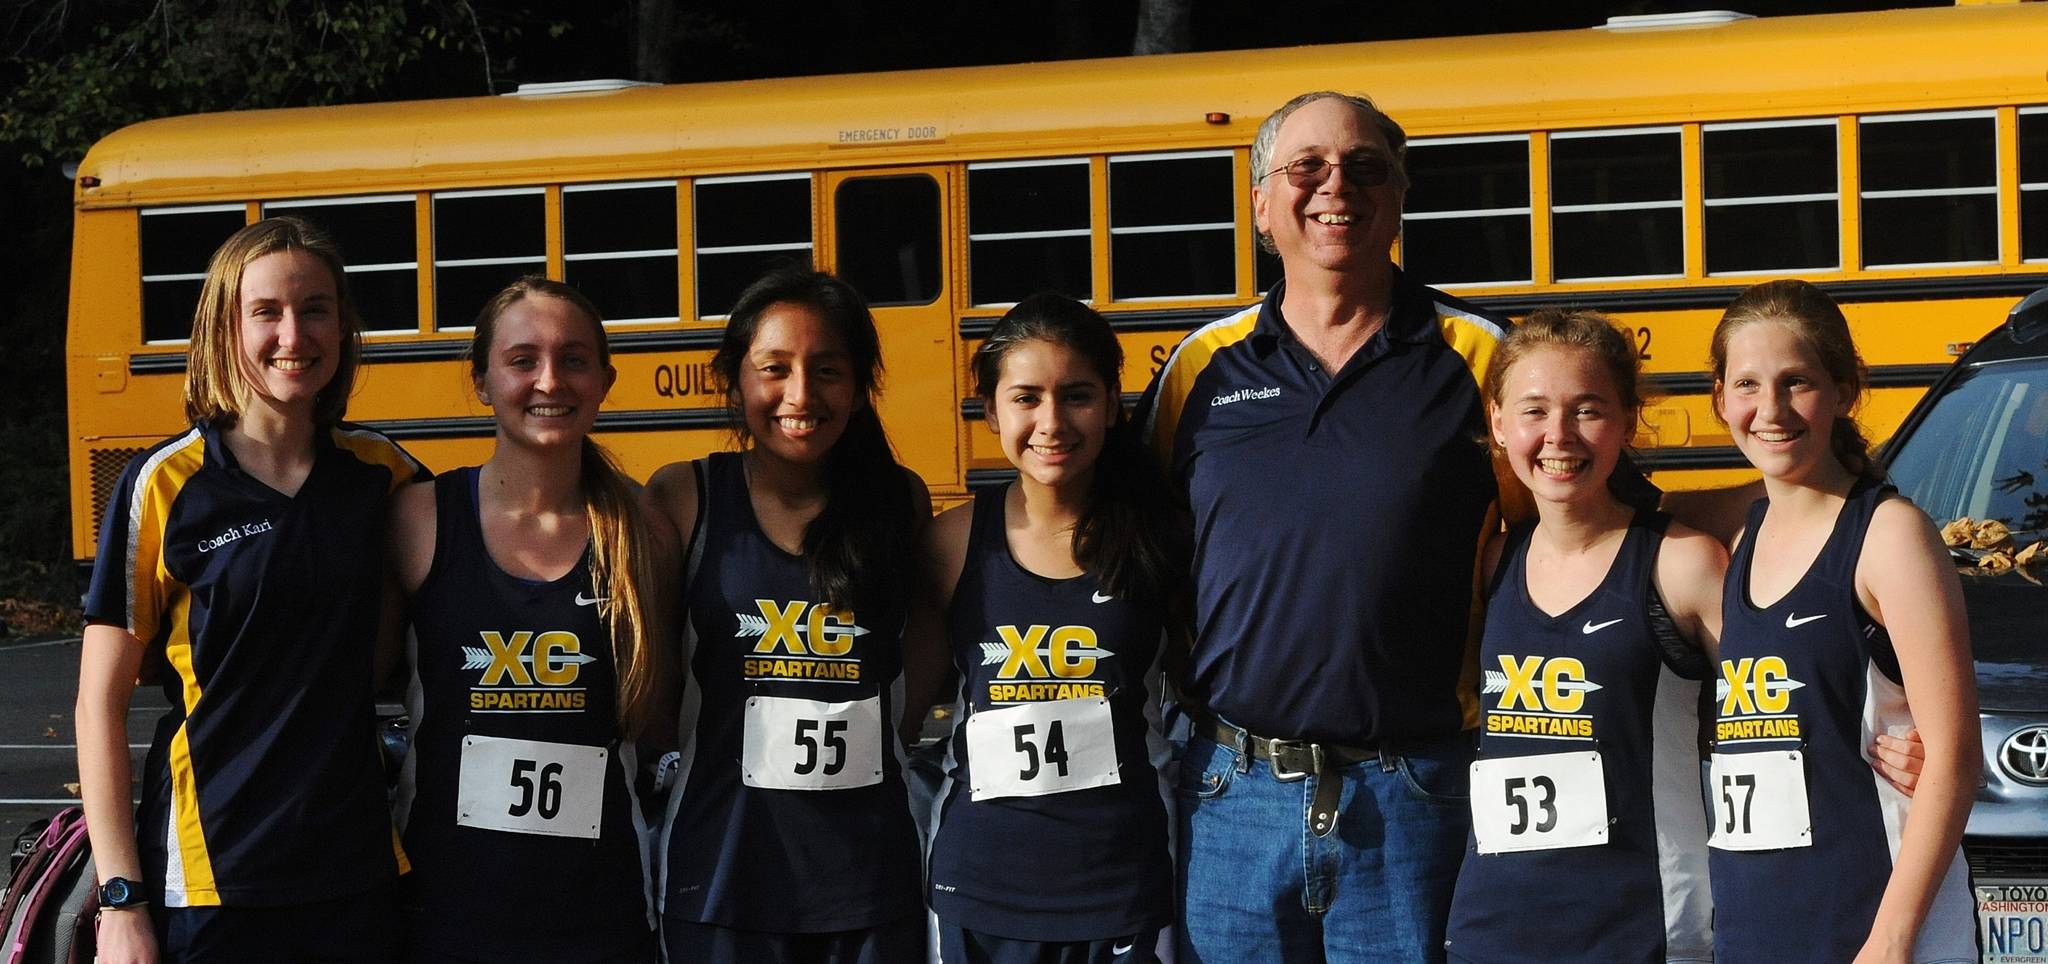 The Spartan women’s cross country team is the Evergreen 1A champions winning the league meet in Montesano. Pictured here from left are Assistant coach Kari Larson, Kayleen Bailey, Melissa Galindo, Karen Ensastegui, coach Brian Weekes, Madelyn Archibald and Savannah Meyer. Photo by Lonnie Archibald